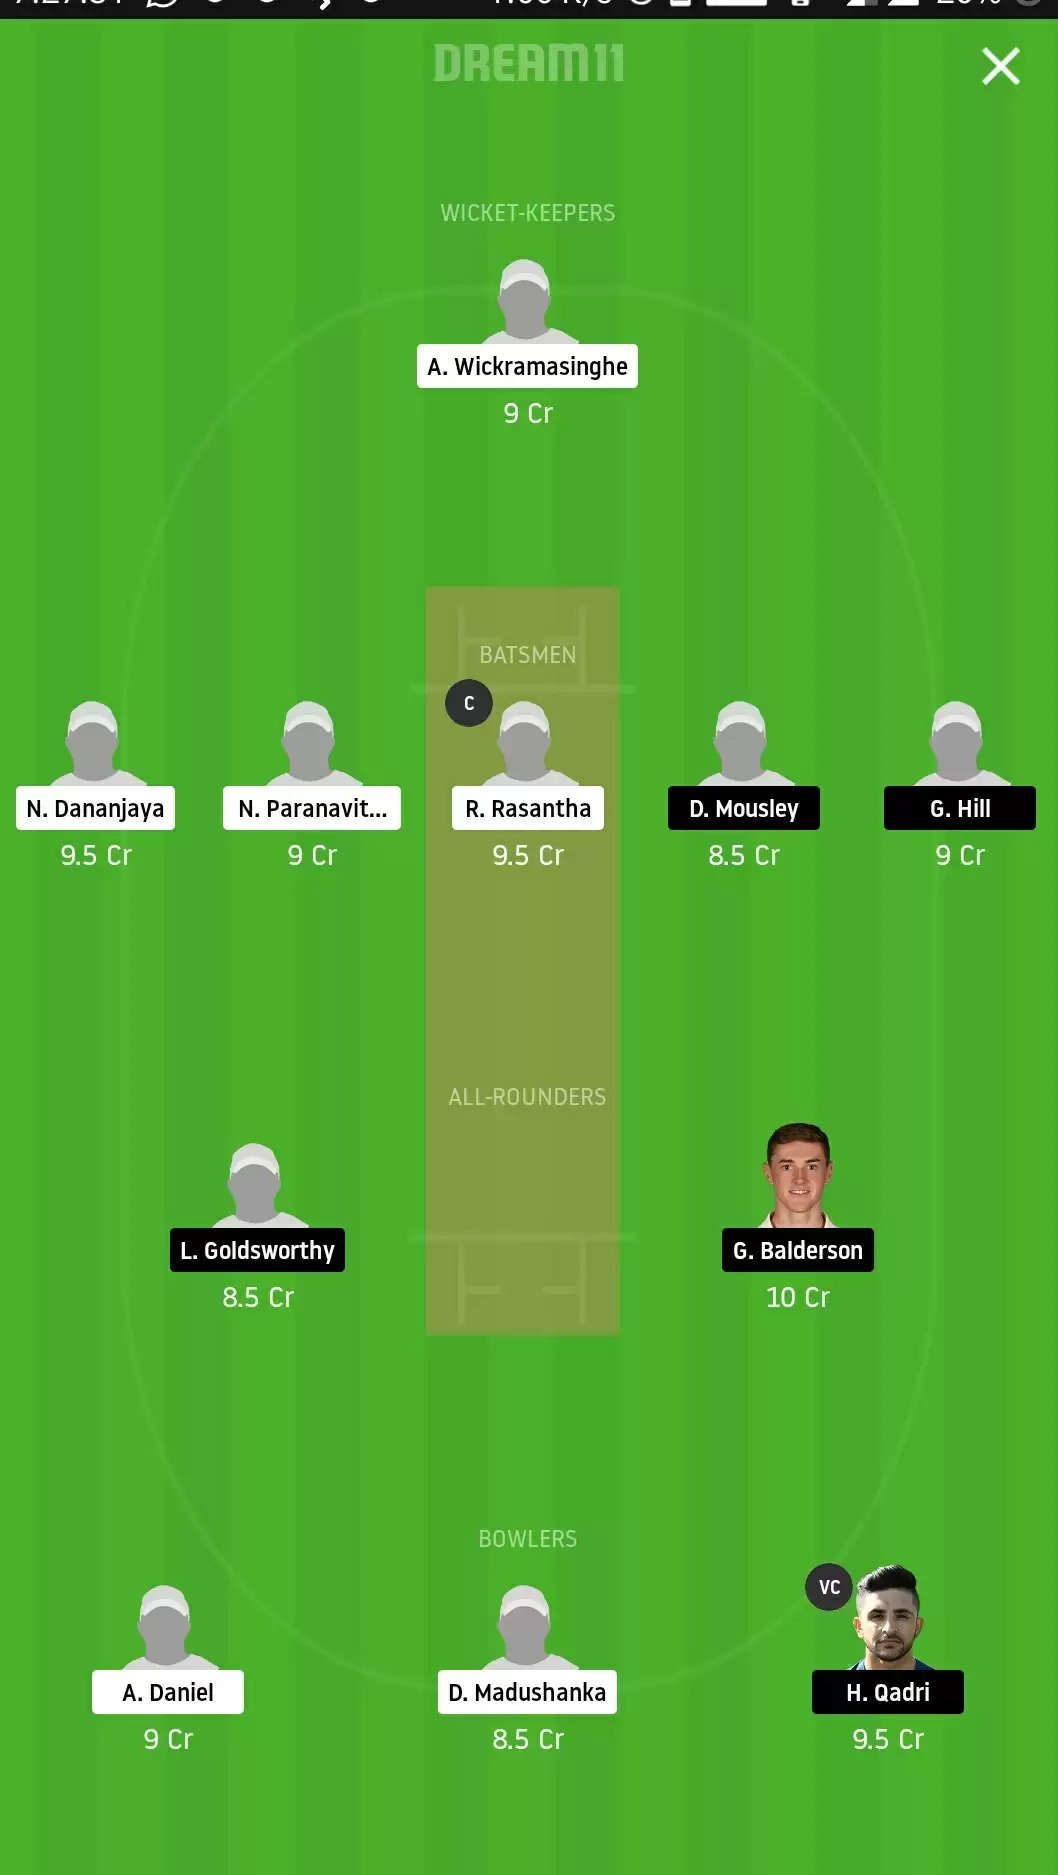 ICC U-19 World Cup: SL U-19 vs ENG U-19 Dream11 Prediction, Fantasy Cricket Tips, Playing XI, Team, Pitch Report And Weather Conditions